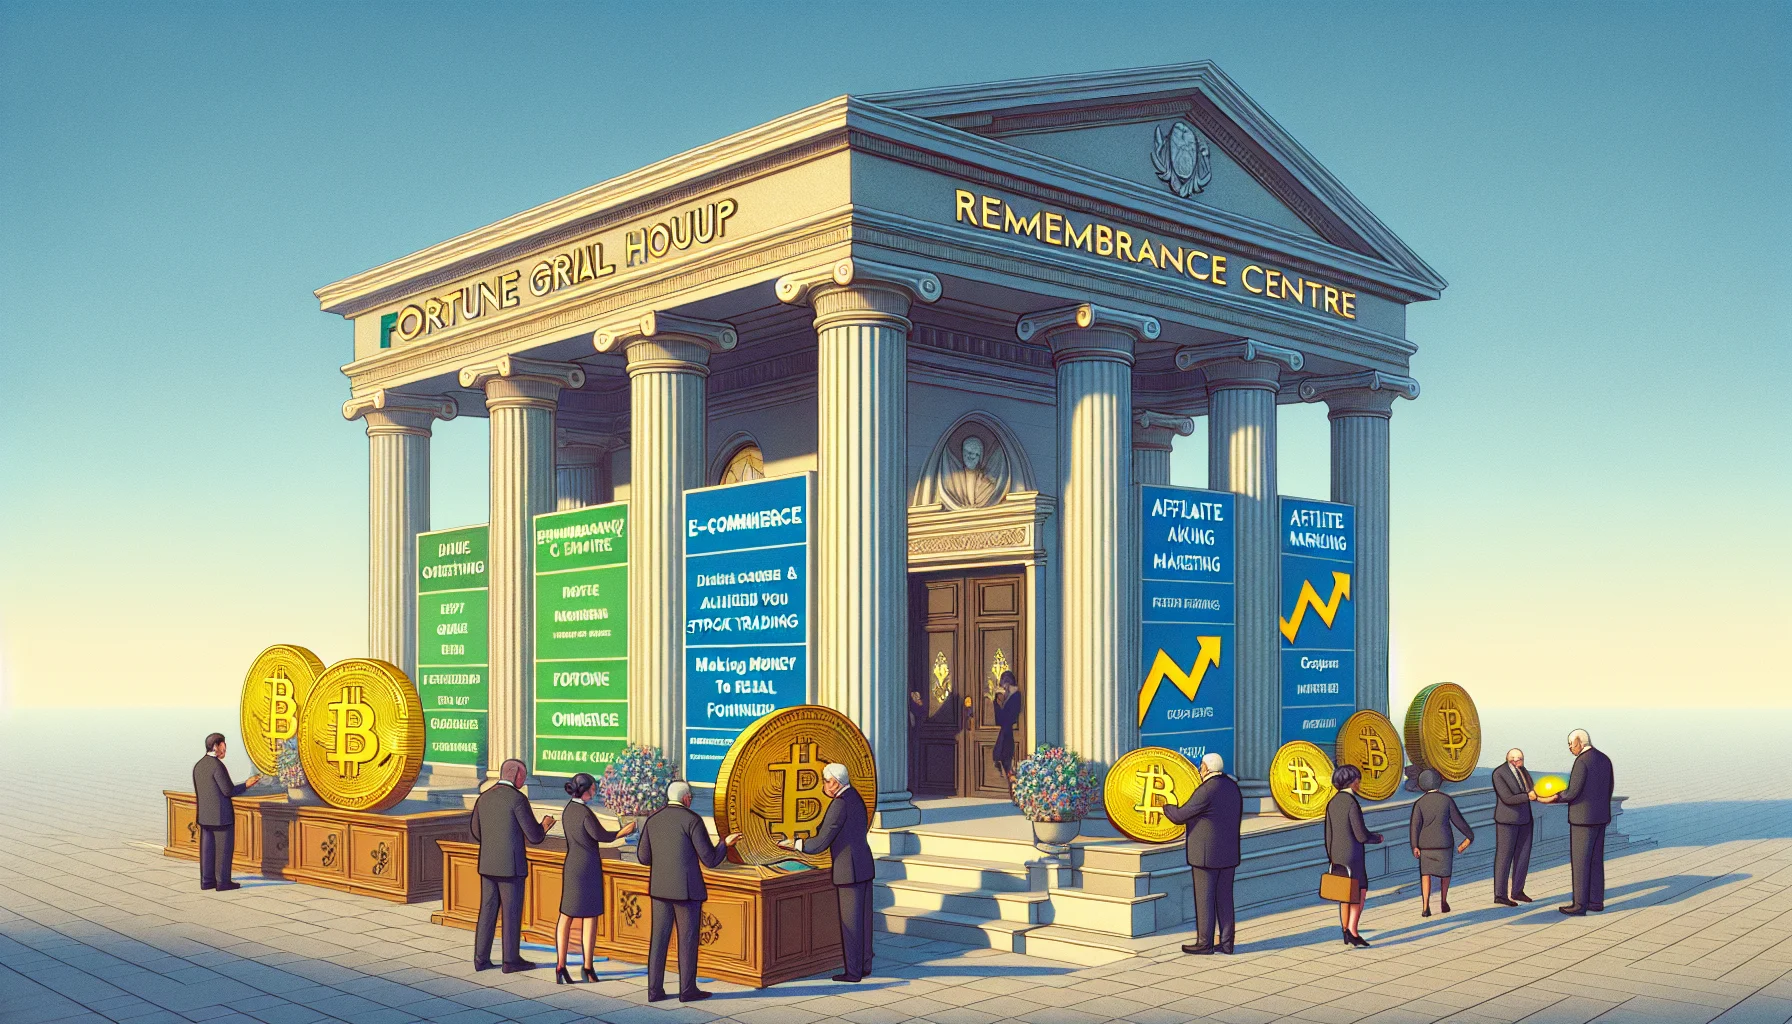 Generate a humorous and realistic image of a fictitious 'Remembrance Centre' affiliated with an imaginary 'Fortune Group Funeral Homes'. The scene unfolds a scenario relating to making money online. Visualize an elegant, carefully designed building featuring classical architecture. Signs on the building advertise various online money-making opportunities such as digital stock trading, e-commerce, affiliate marketing, and crypto investments. The atmosphere is enlivened by equally humorous details like people happily examining graphics of ascending stock arrows and exchanging oversized golden Bitcoins. Please ensure all details are tastefully handled, respecting the sensitive nature of funeral homes.